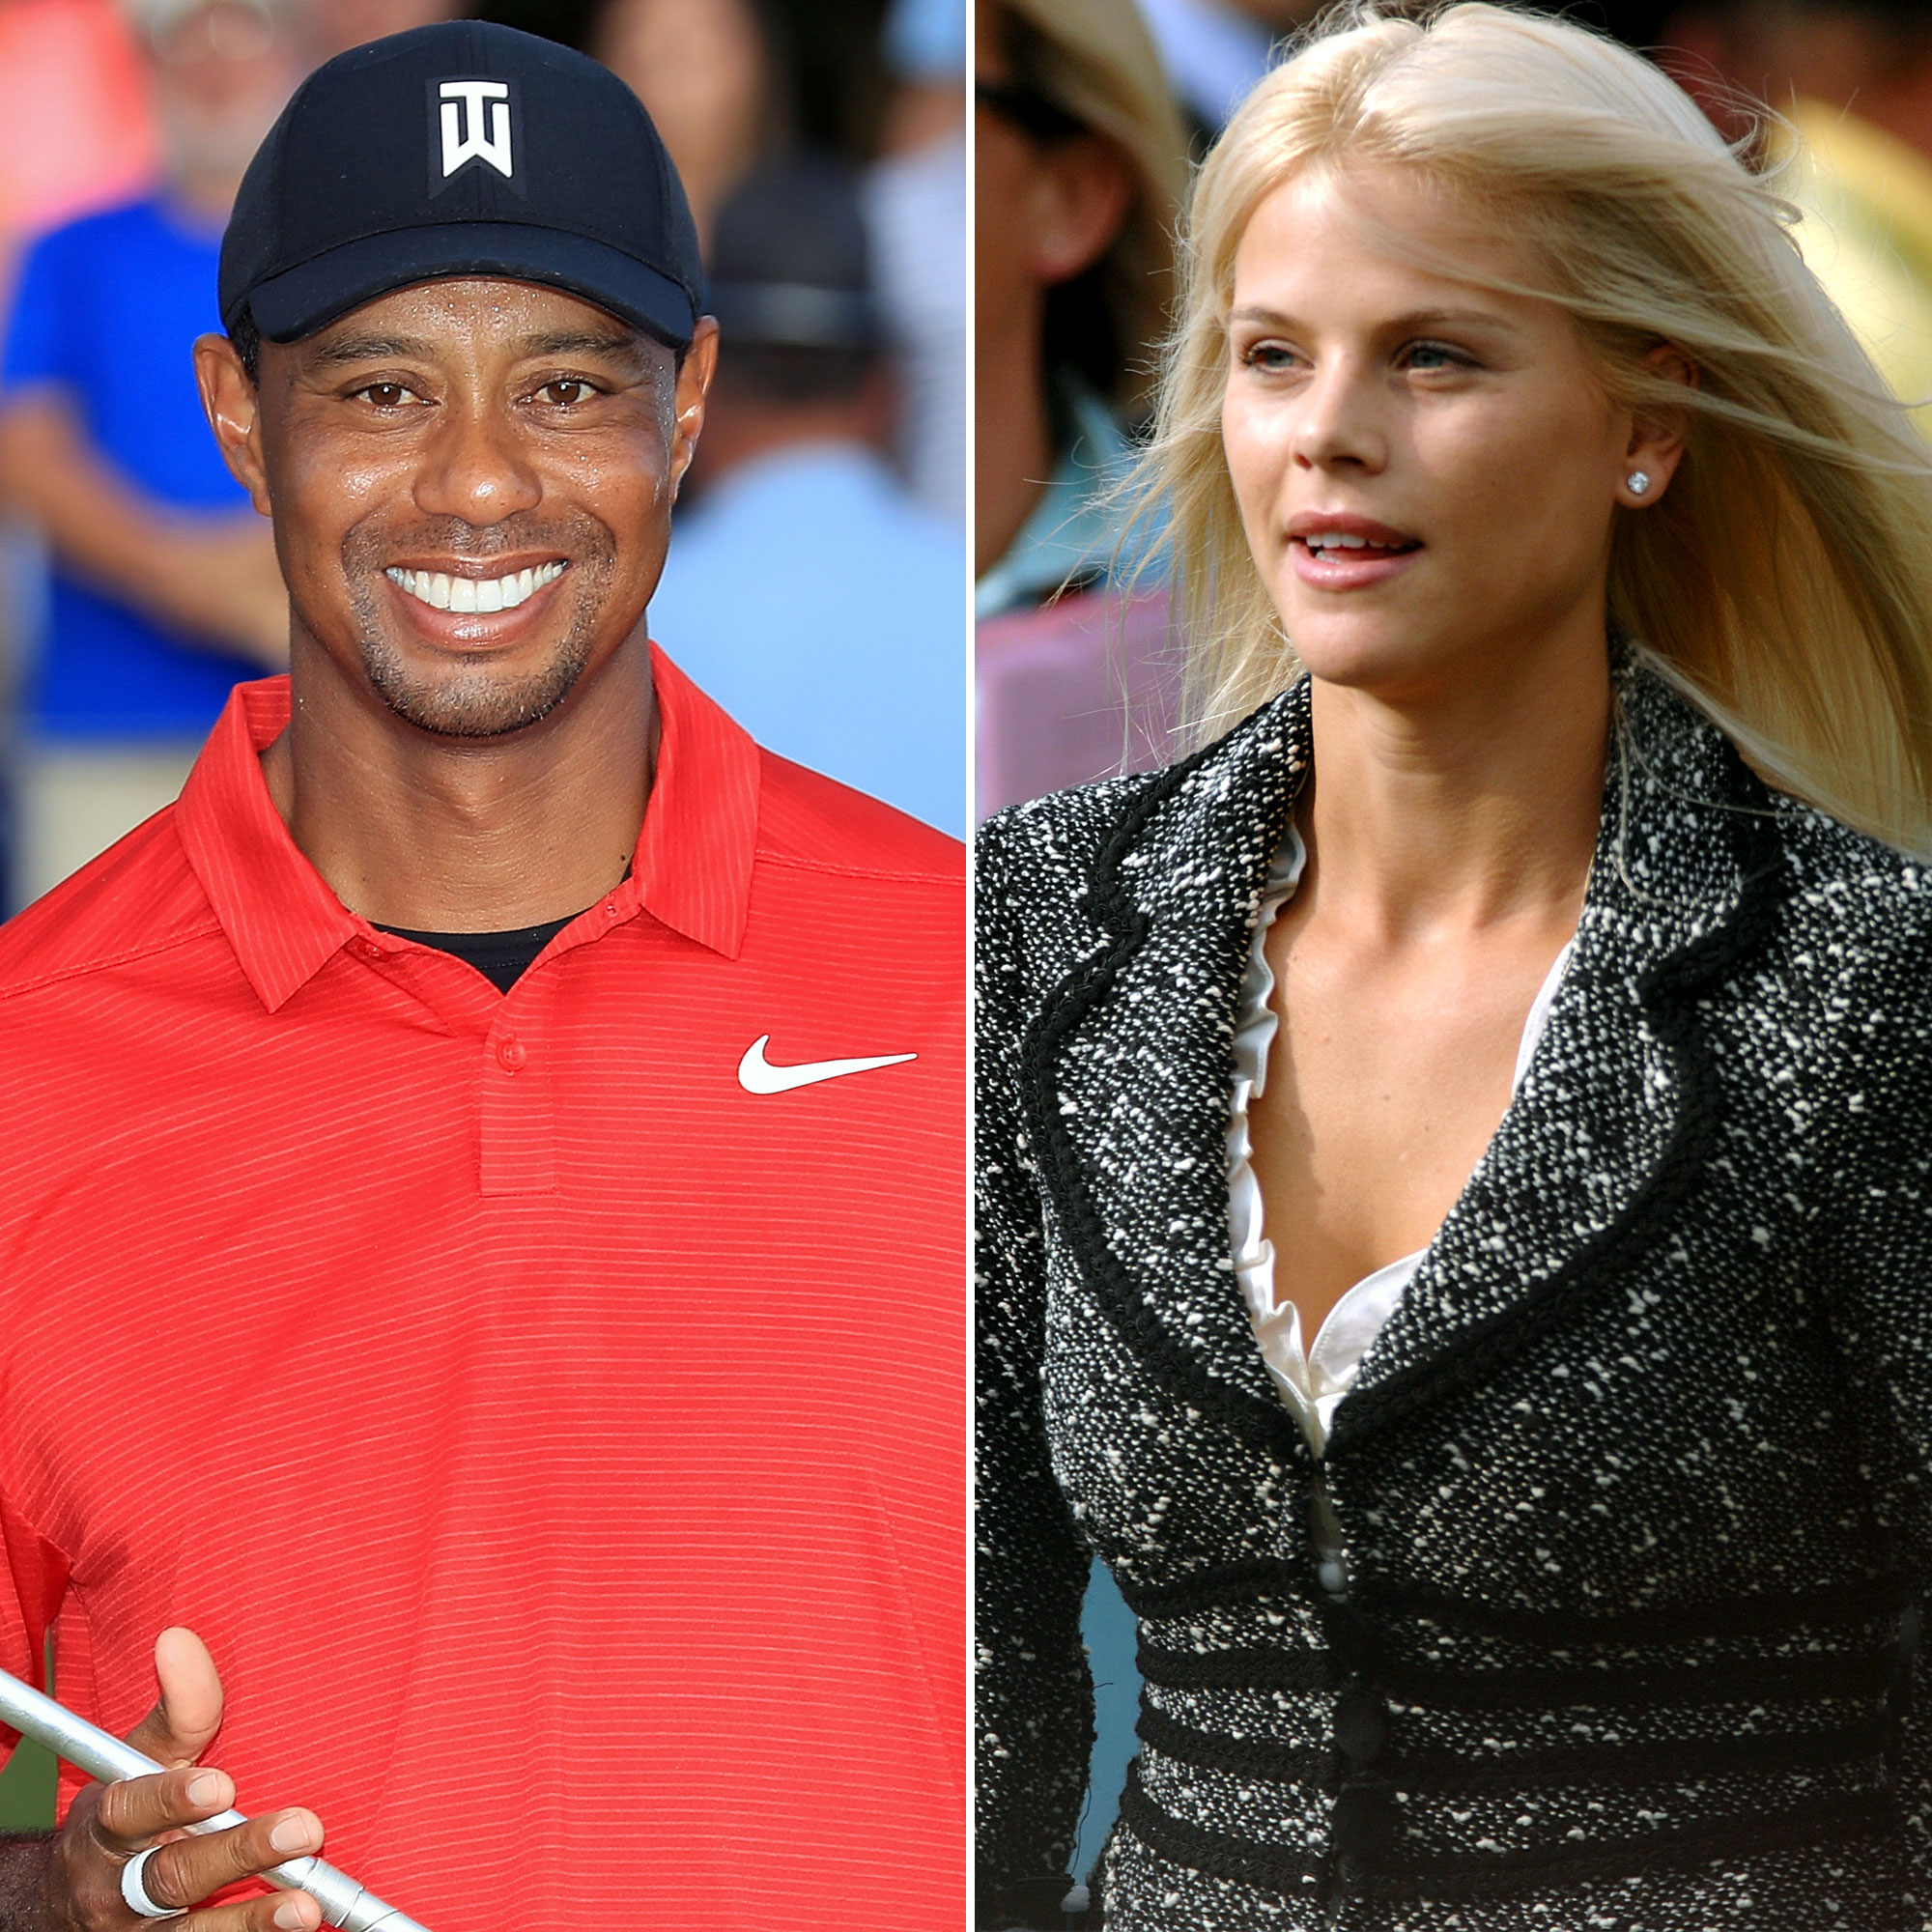 Tiger Woods Ex Wife Elin Nordegren S Baby Revealed To Be A Boy As Court Doc...